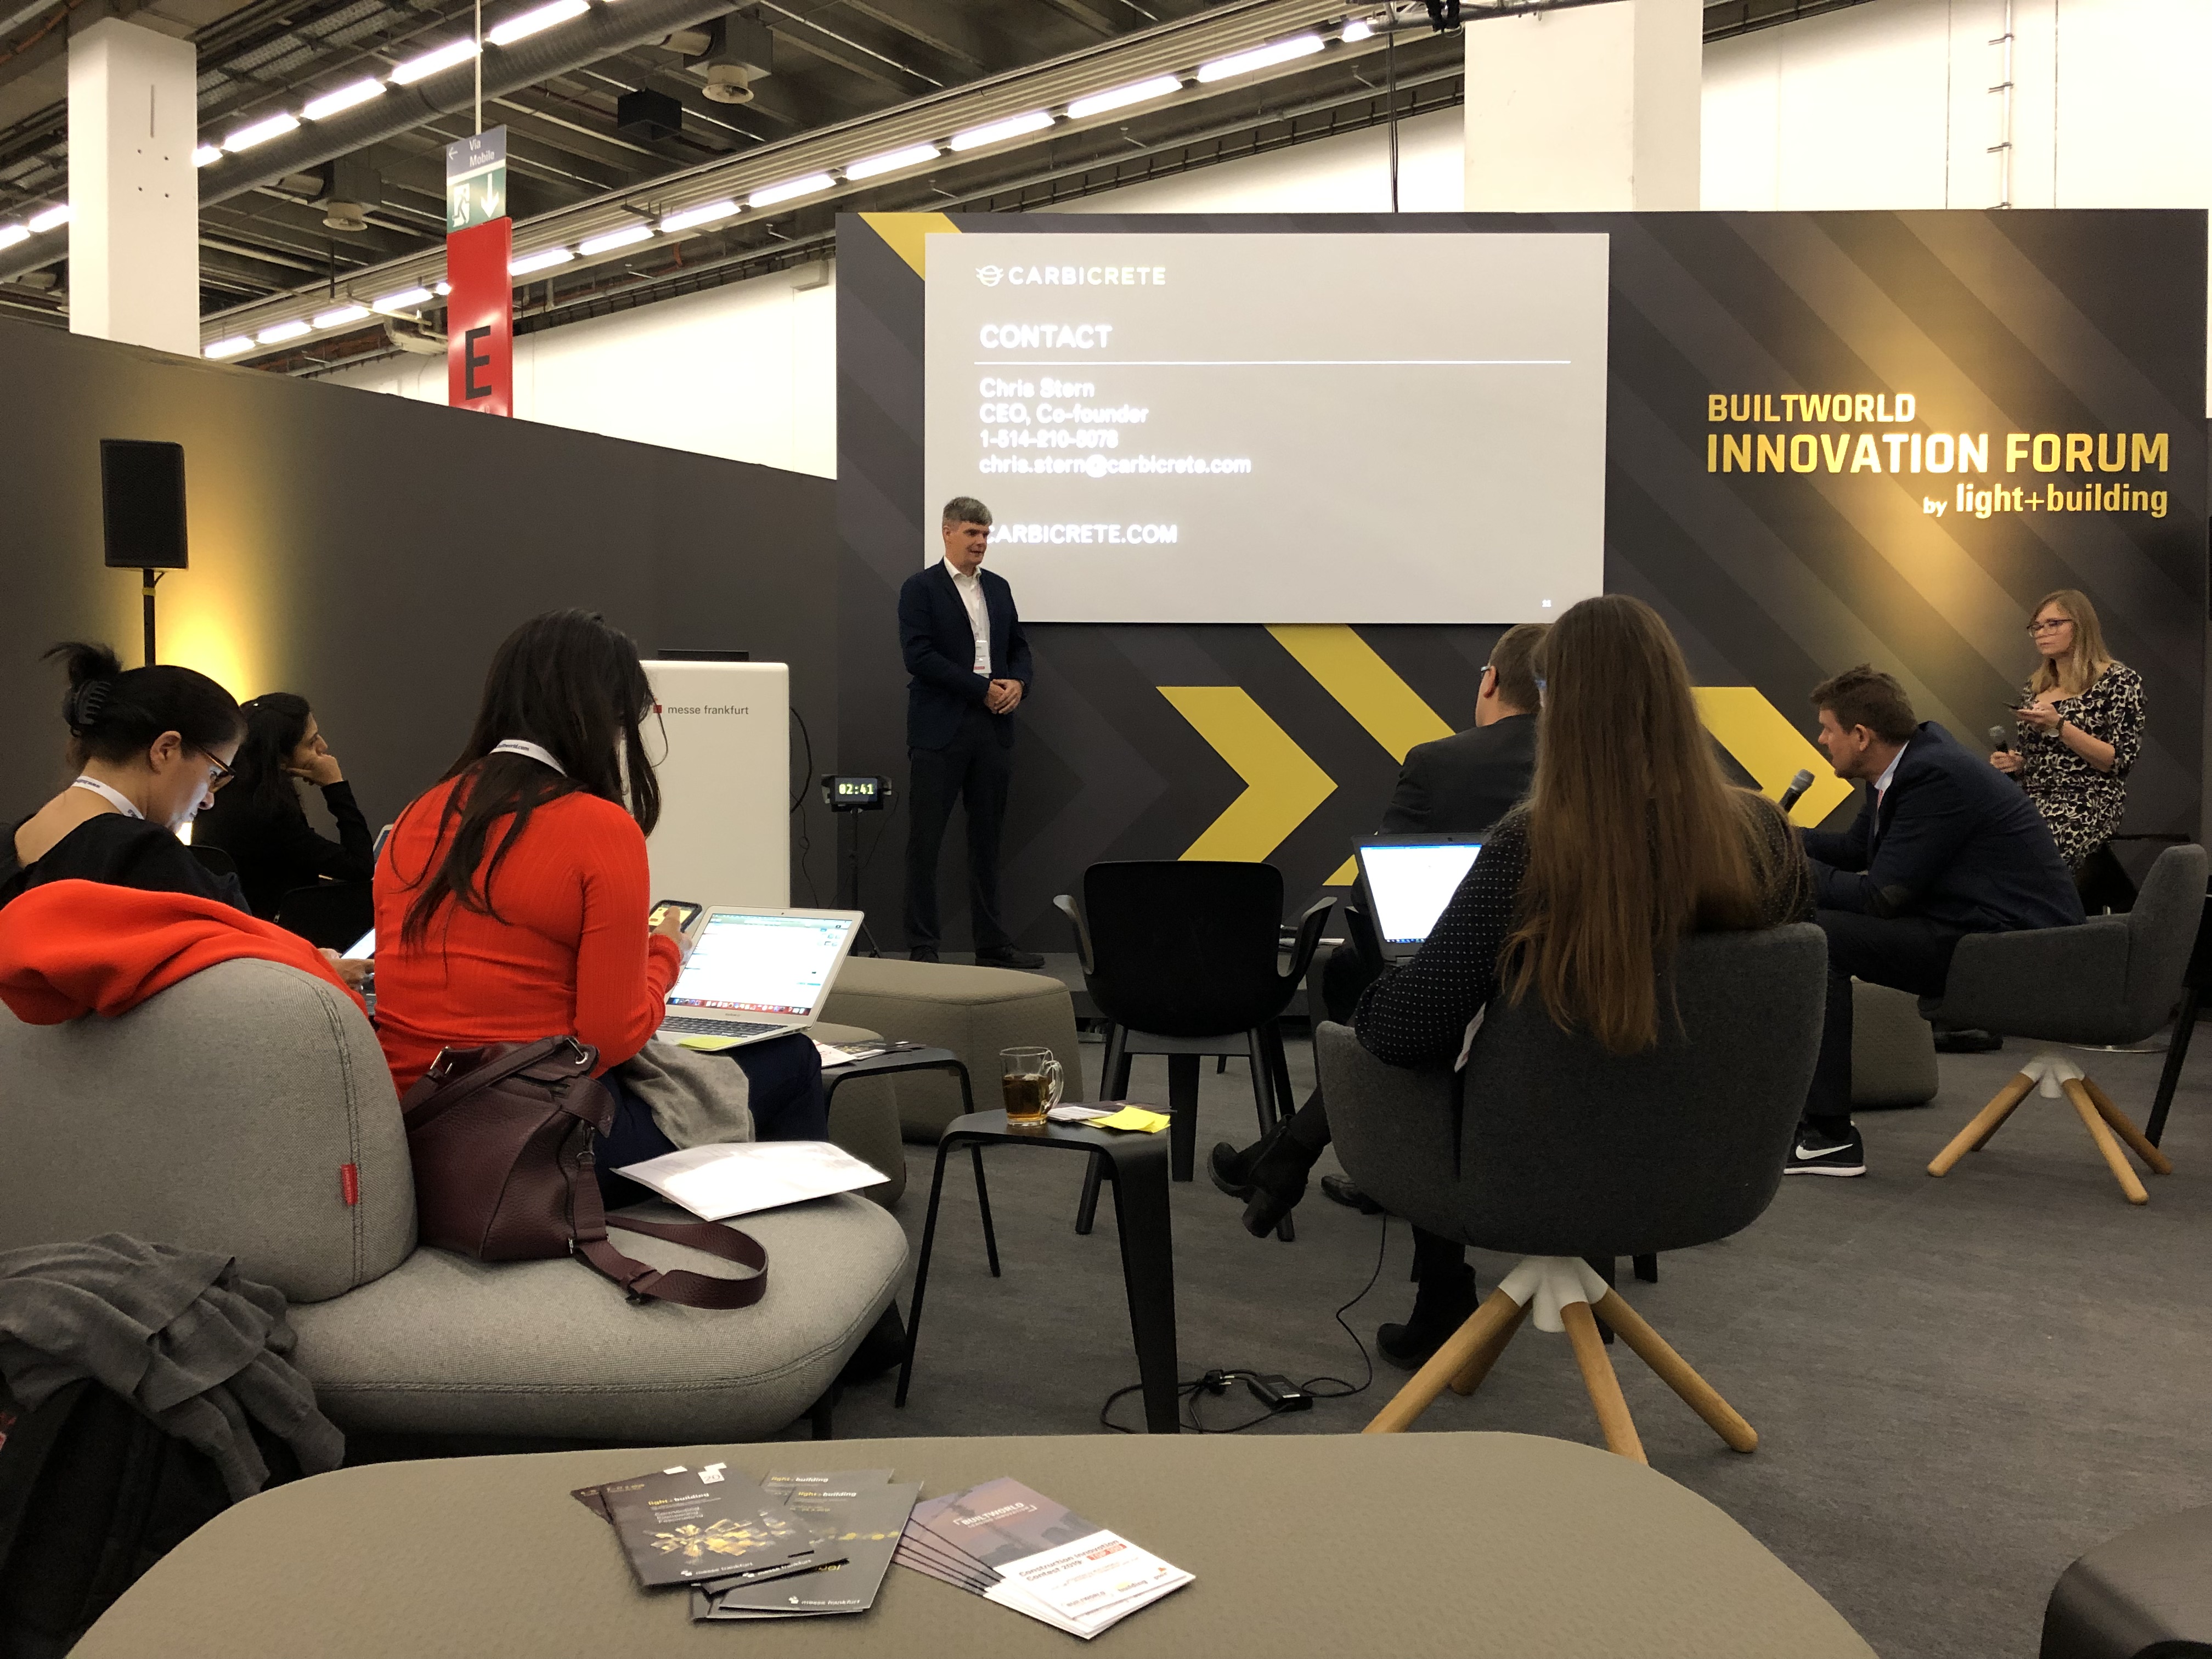 Builtworld Construction Innovation Contest: The two-day prepitch in hall 9.0 of Messe Frankfurt brought together jurors from the best-known established companies in the real estate and construction sectors as well as building technology.